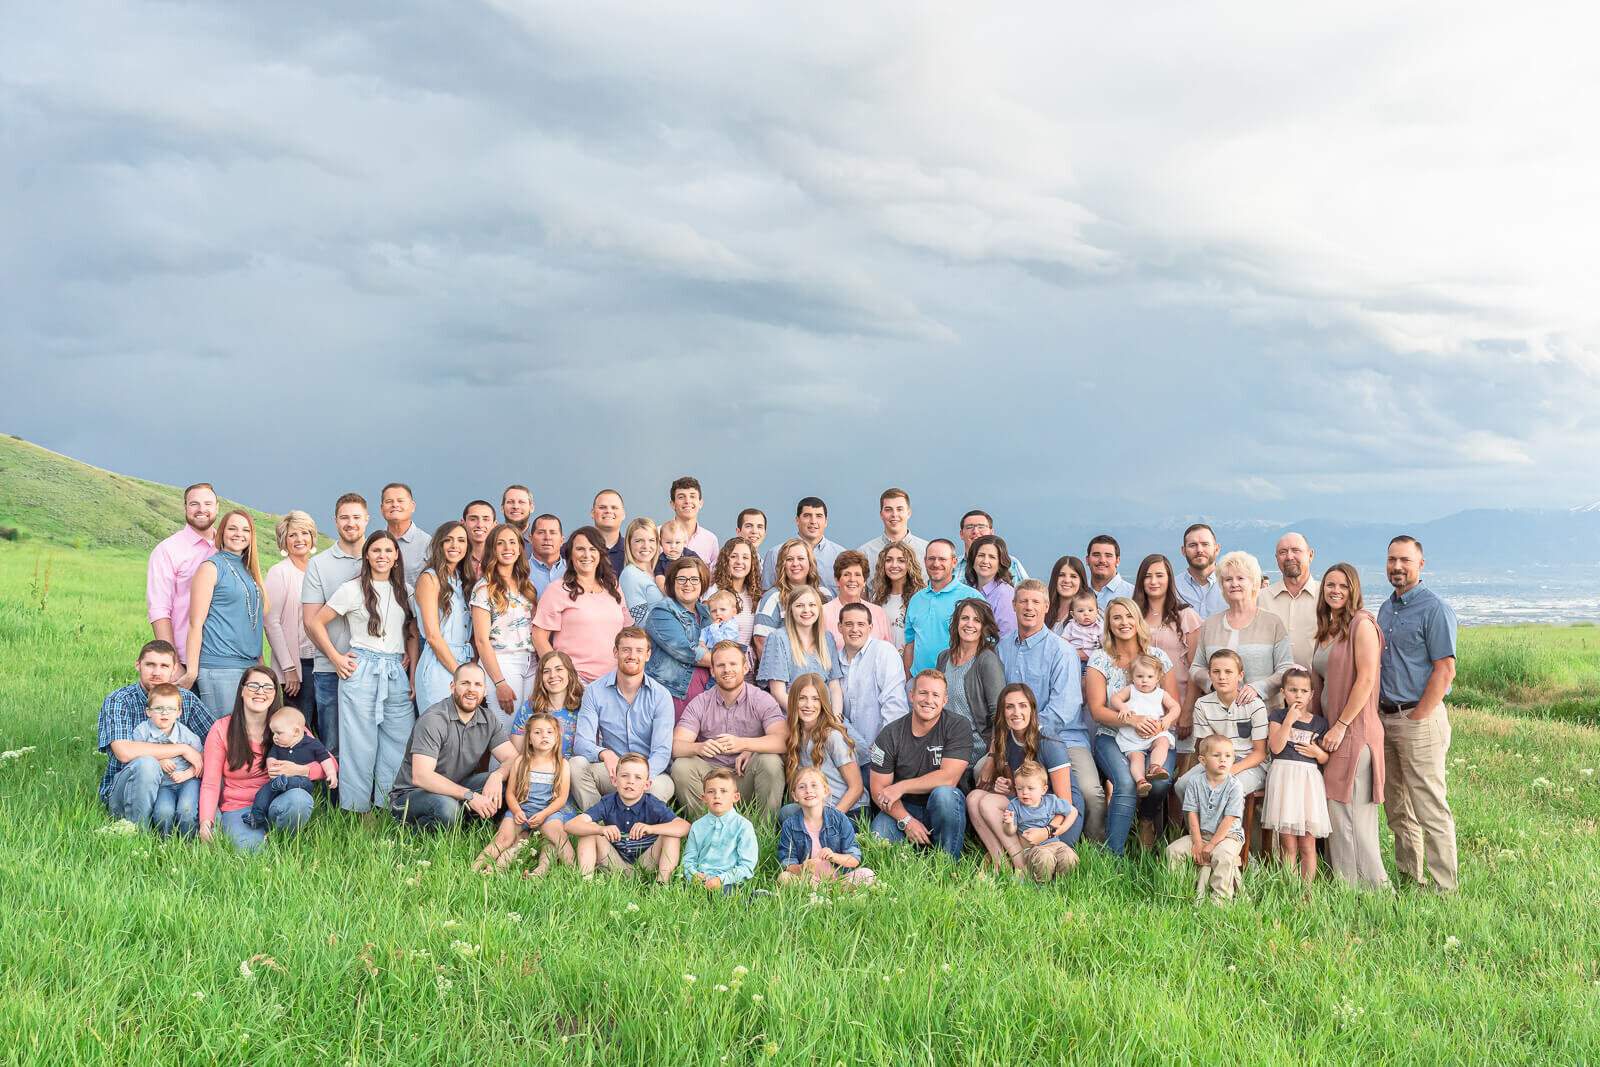 A large extended family gather together for portraits in a lush green field at Tunnel Springs in Salt Lake City